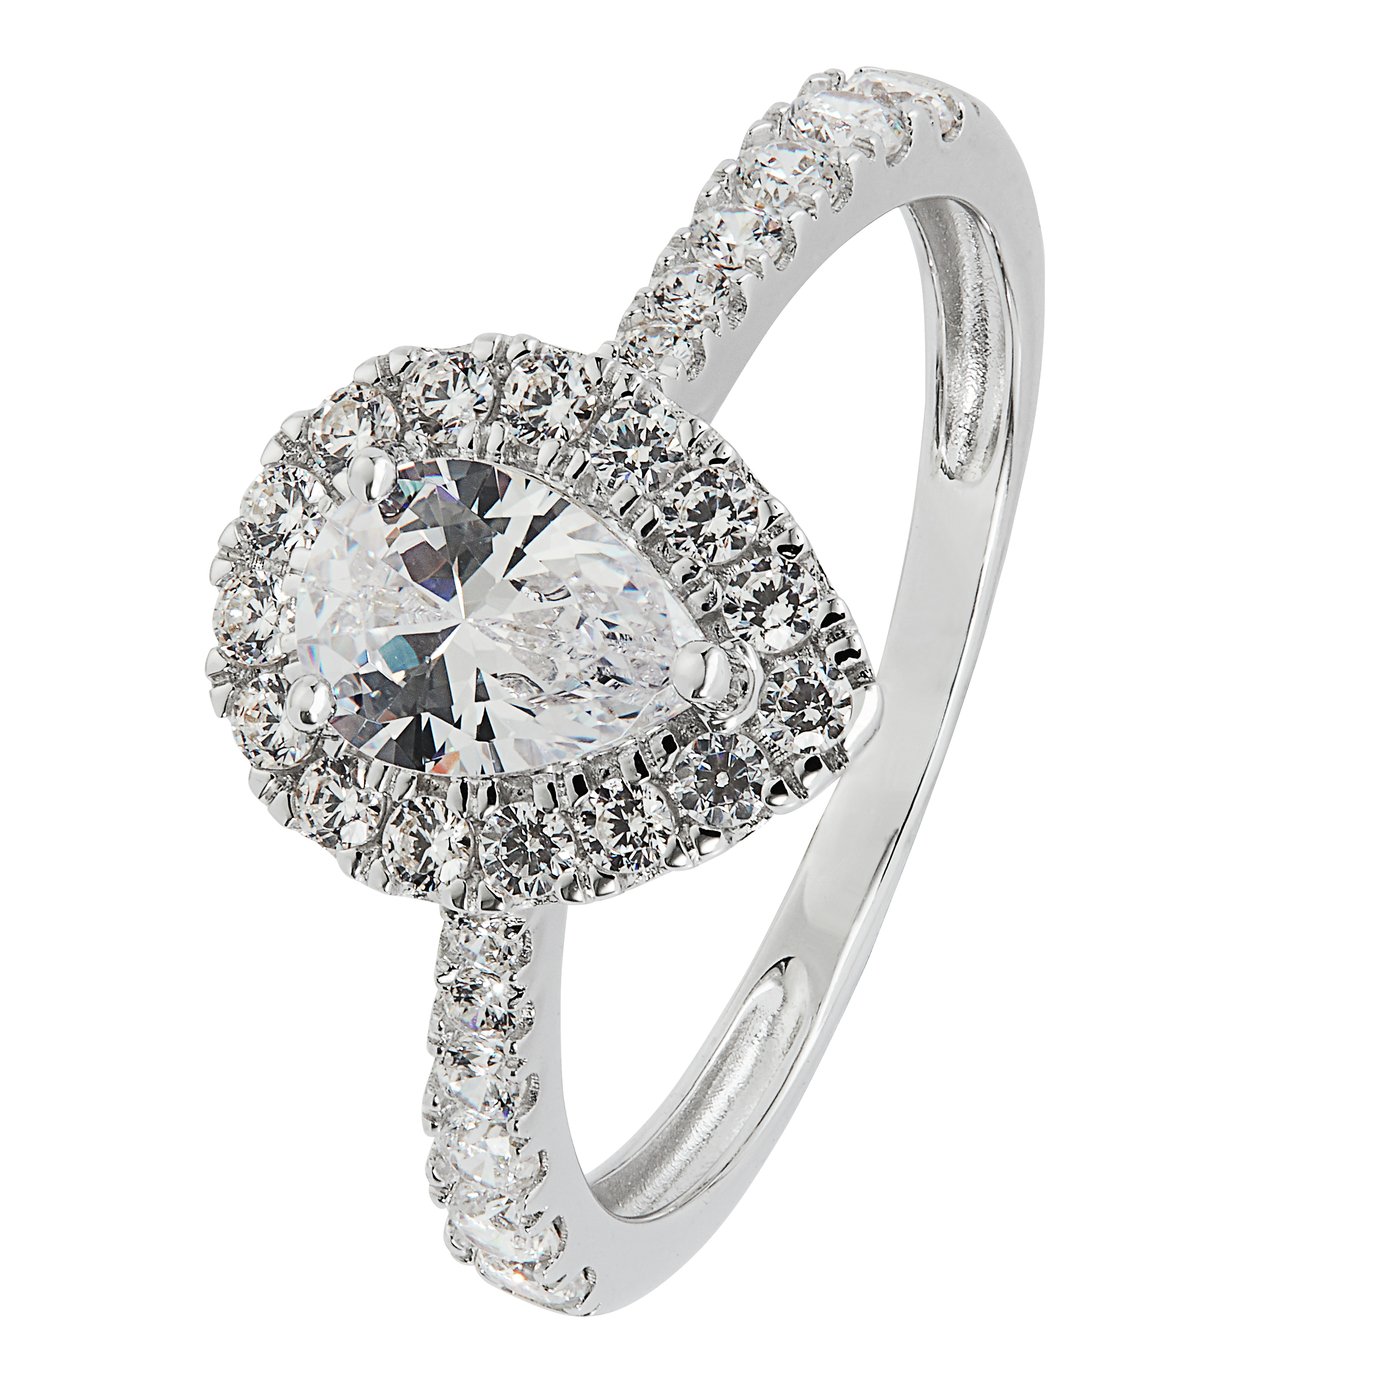 Revere 9ct White Gold Cubic Zirconia Halo Engagement Ring N